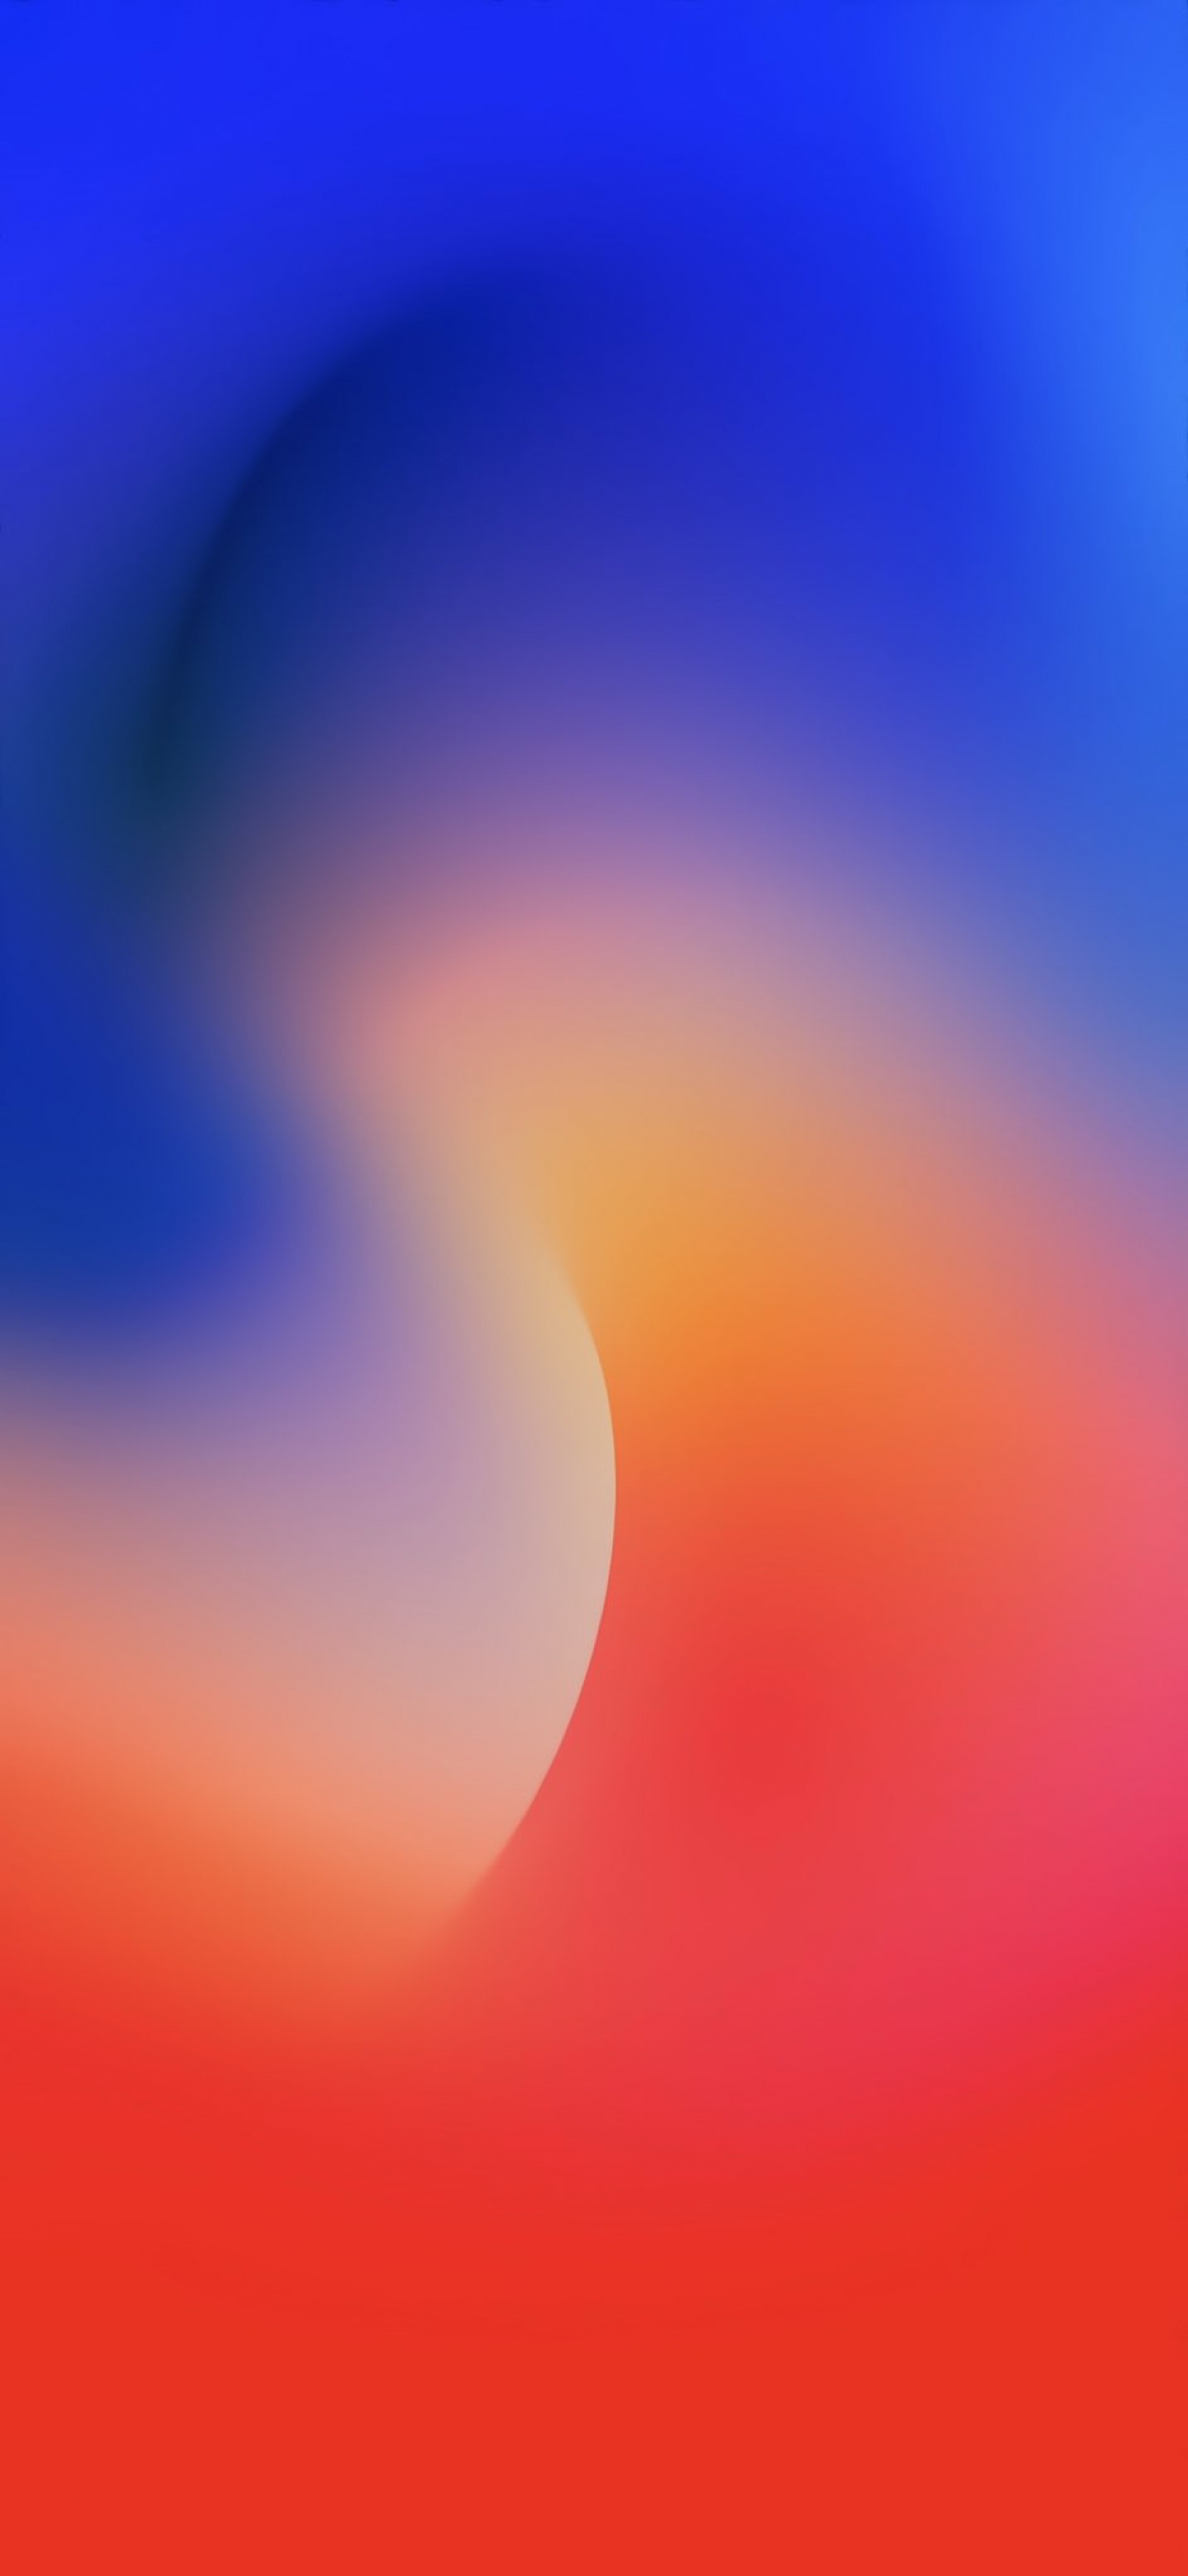 Gradient Swirl Red And Blue wallpaper for Apple iPhone, Mac, iPad and more